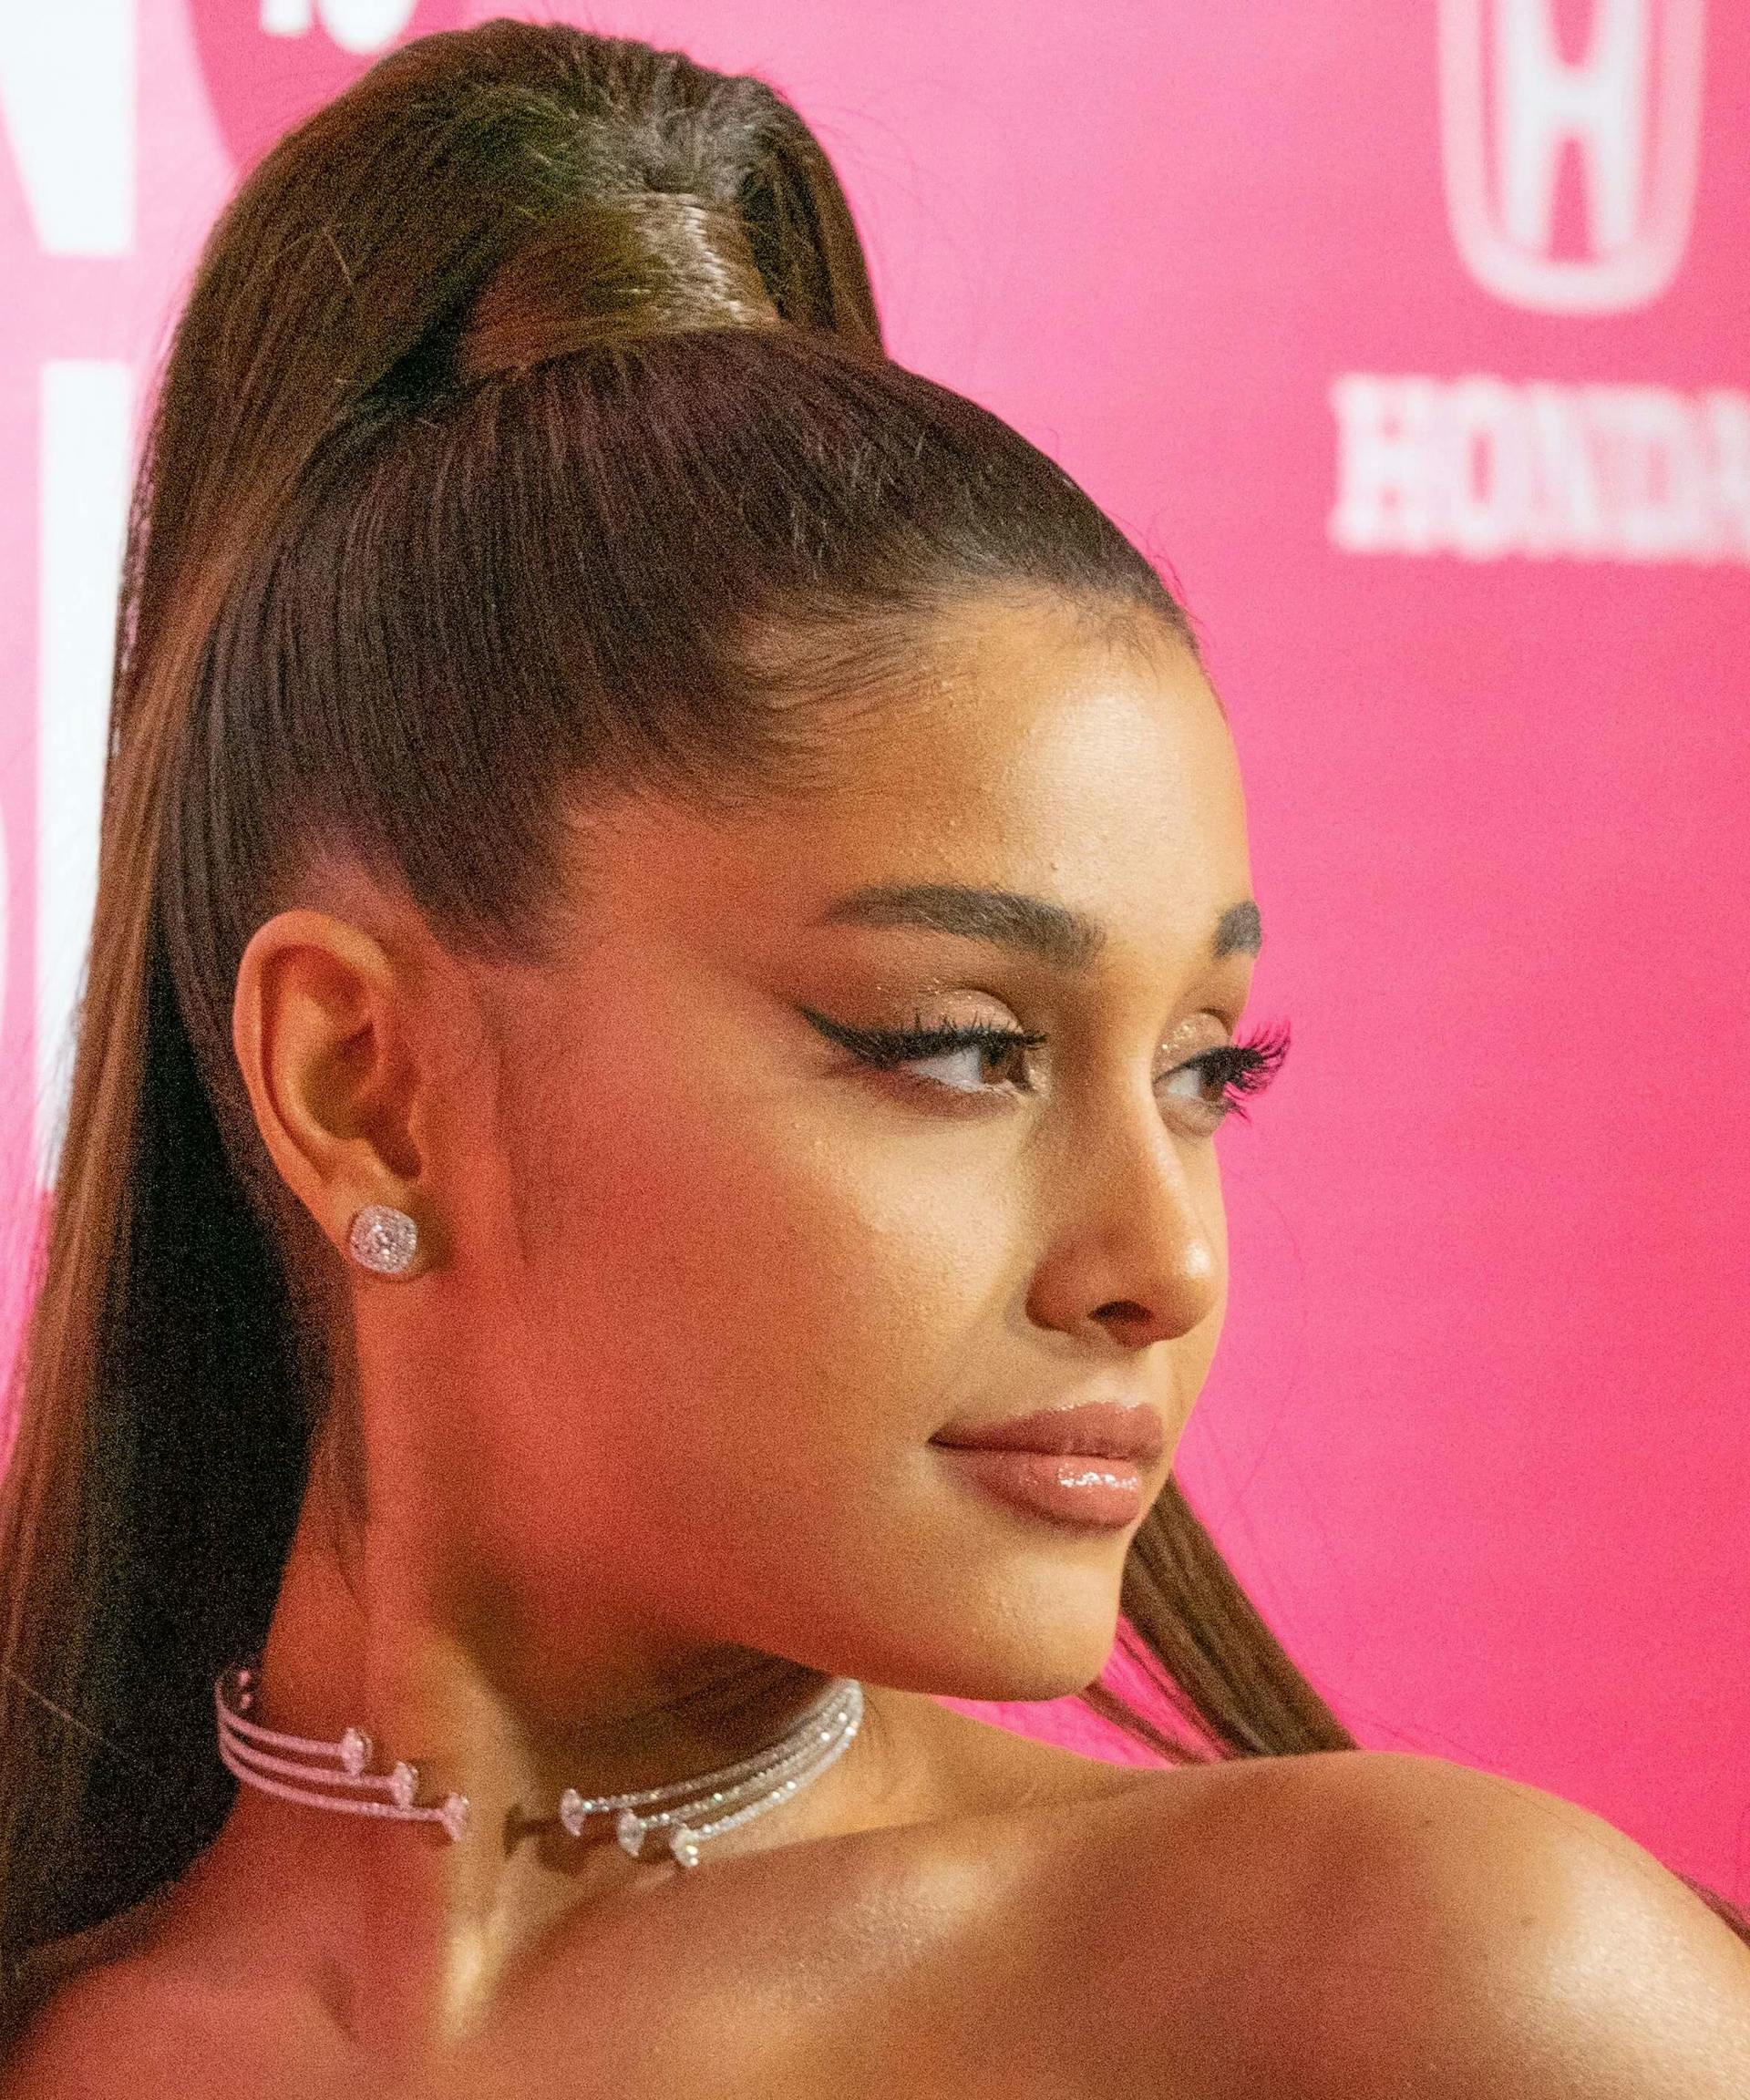 Ariana Grande Is Launching A Beauty Line Inspired By Her Song "God Is A Woman" shutterstock